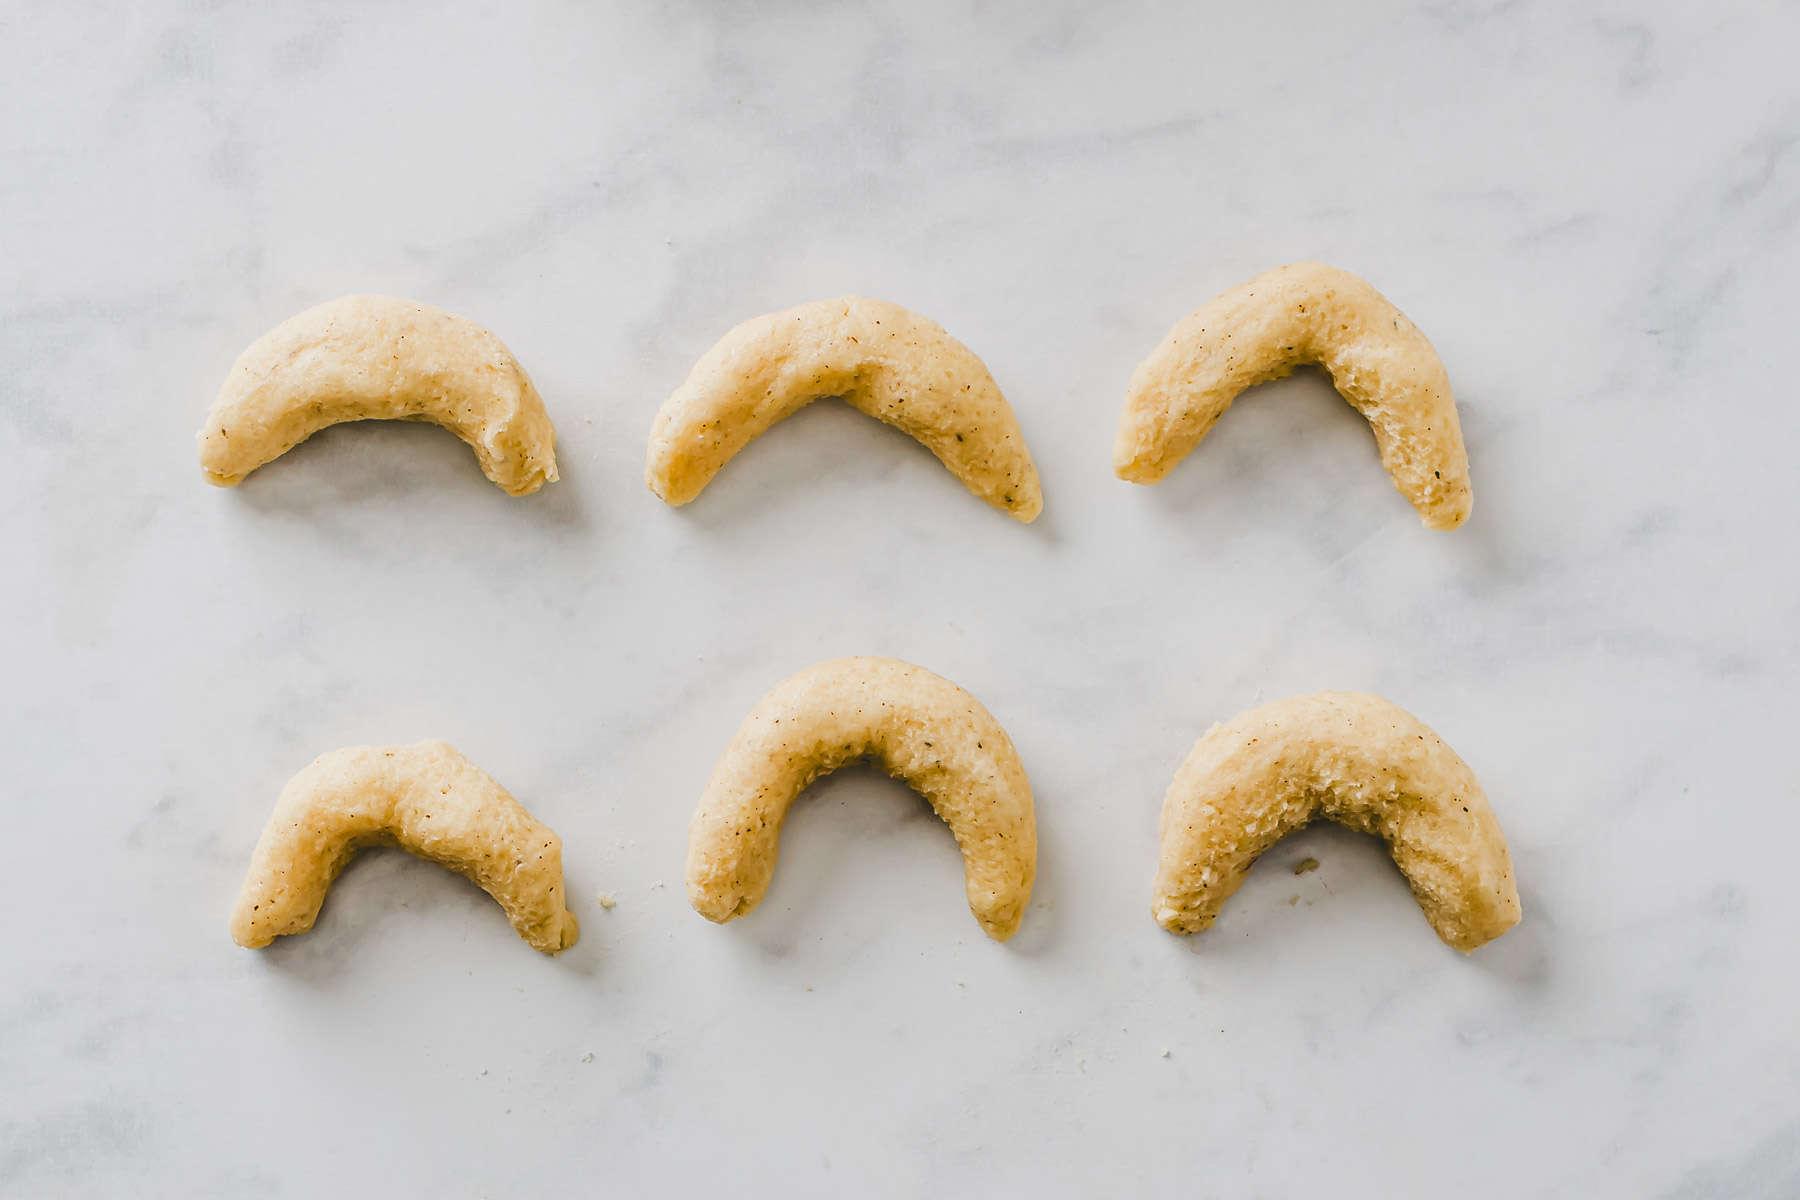 Shaping Almond Crescent Cookies